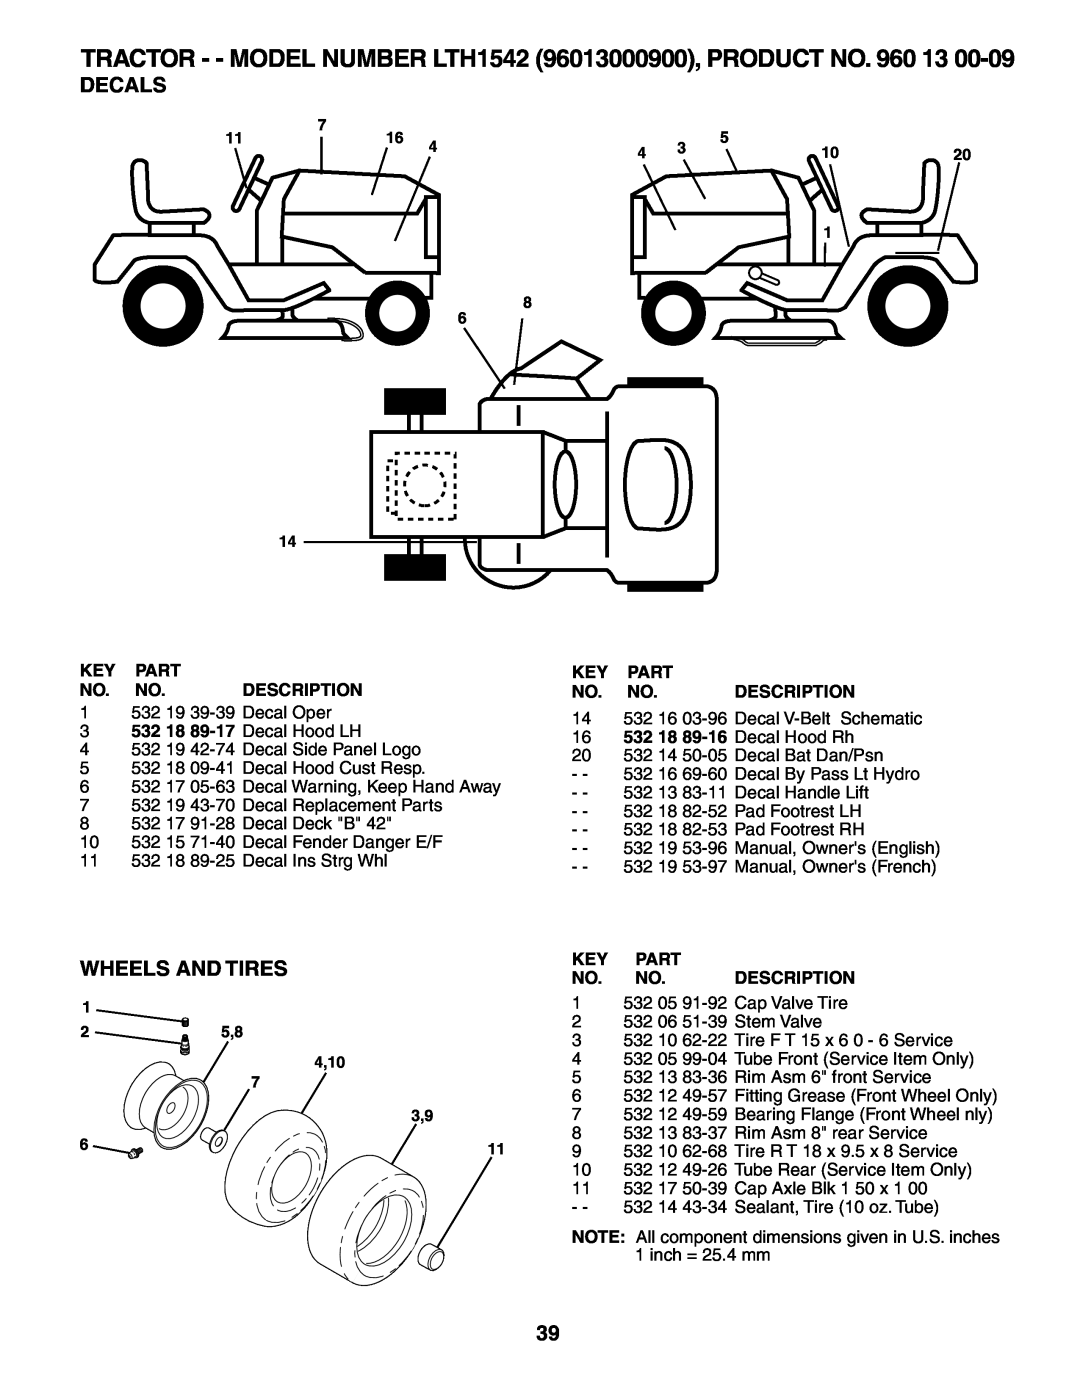 Husqvarna owner manual Decals, Wheels And Tires, TRACTOR - - MODEL NUMBER LTH1542 96013000900, PRODUCT NO. 960 13 